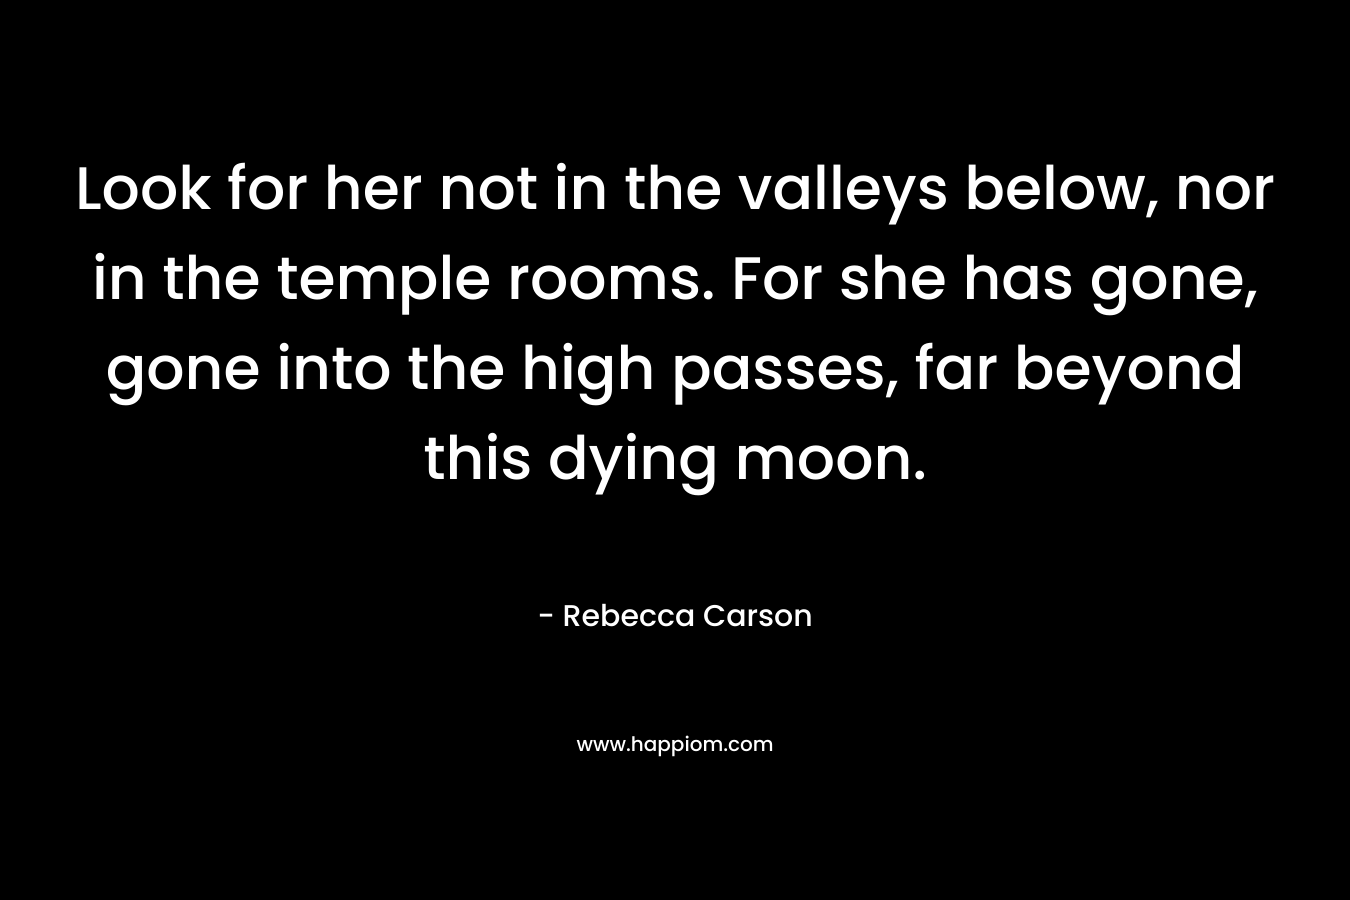 Look for her not in the valleys below, nor in the temple rooms. For she has gone, gone into the high passes, far beyond this dying moon.